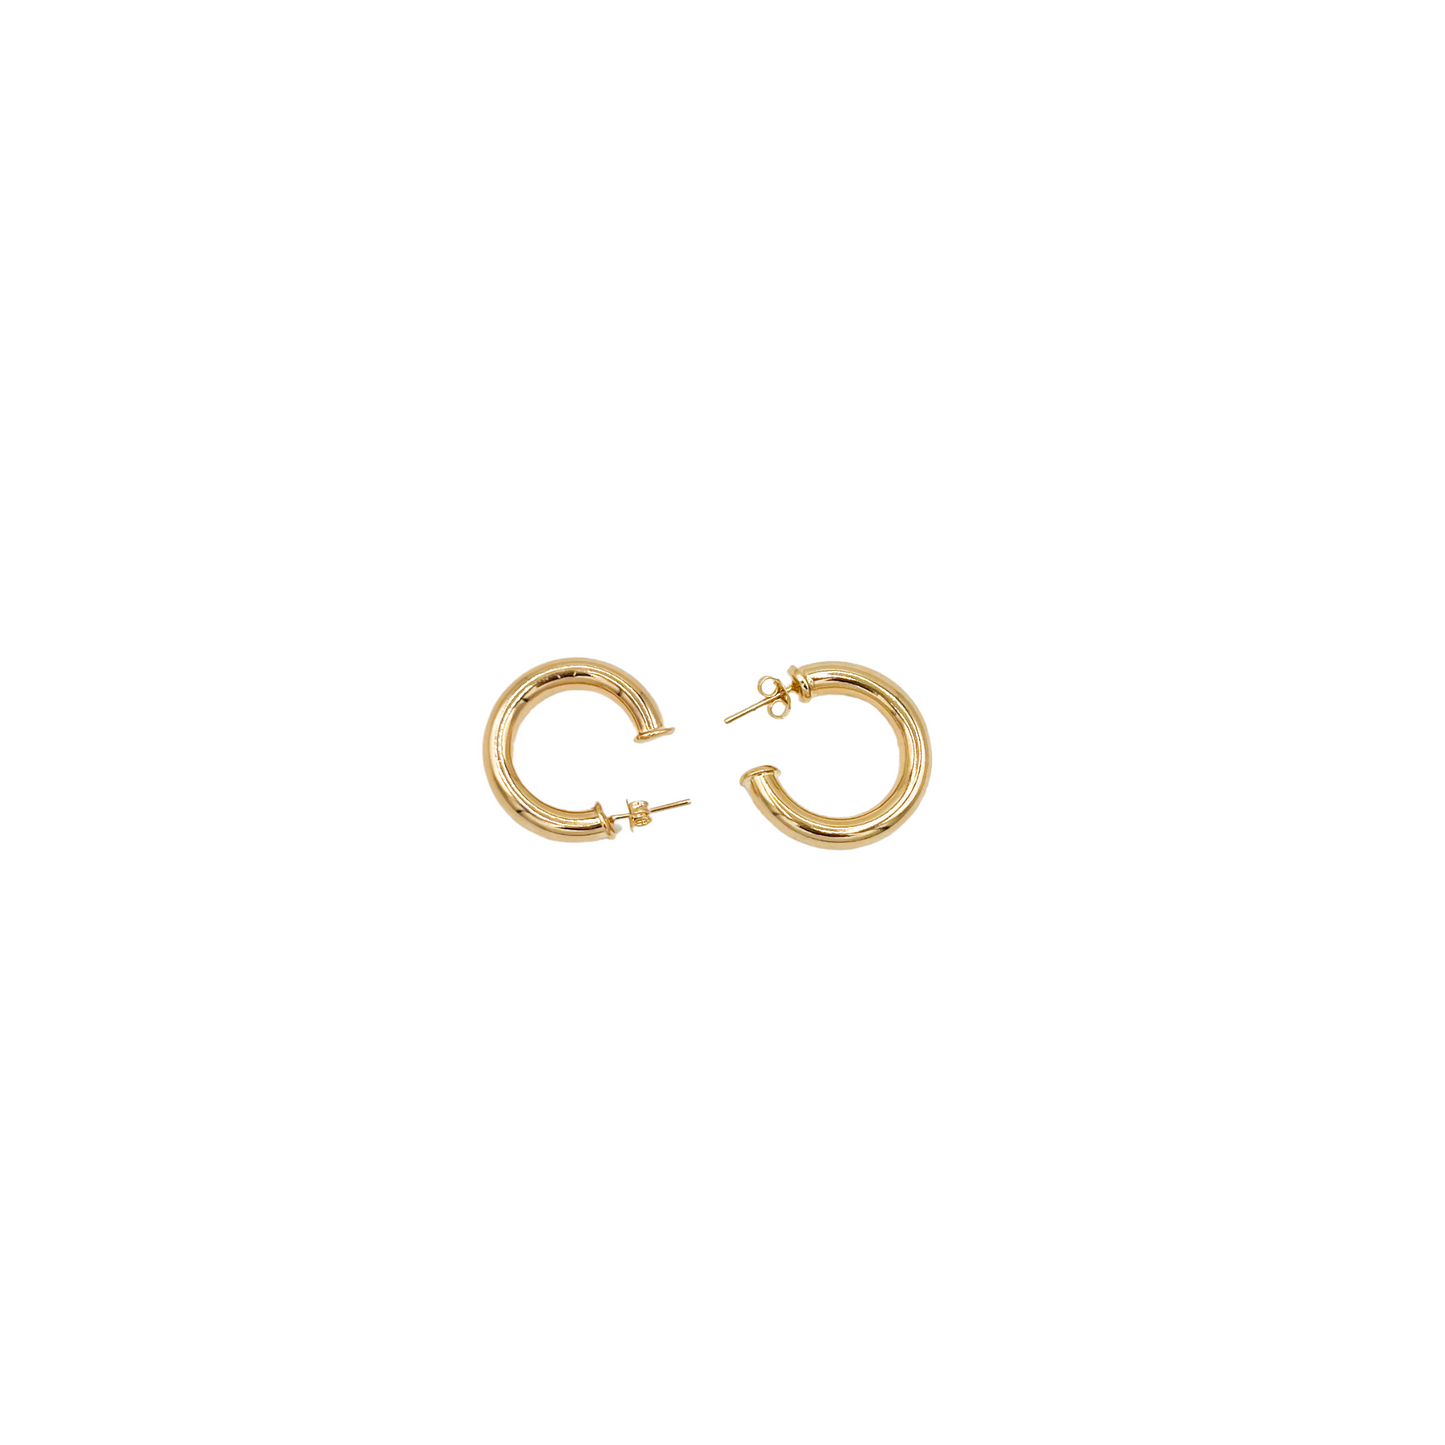 Roop Jewelry chunky hoops. Gold-filled chunky hoops. Silver hoops. bipoc jewelry boutique Oakland. South Asian jewelry business.